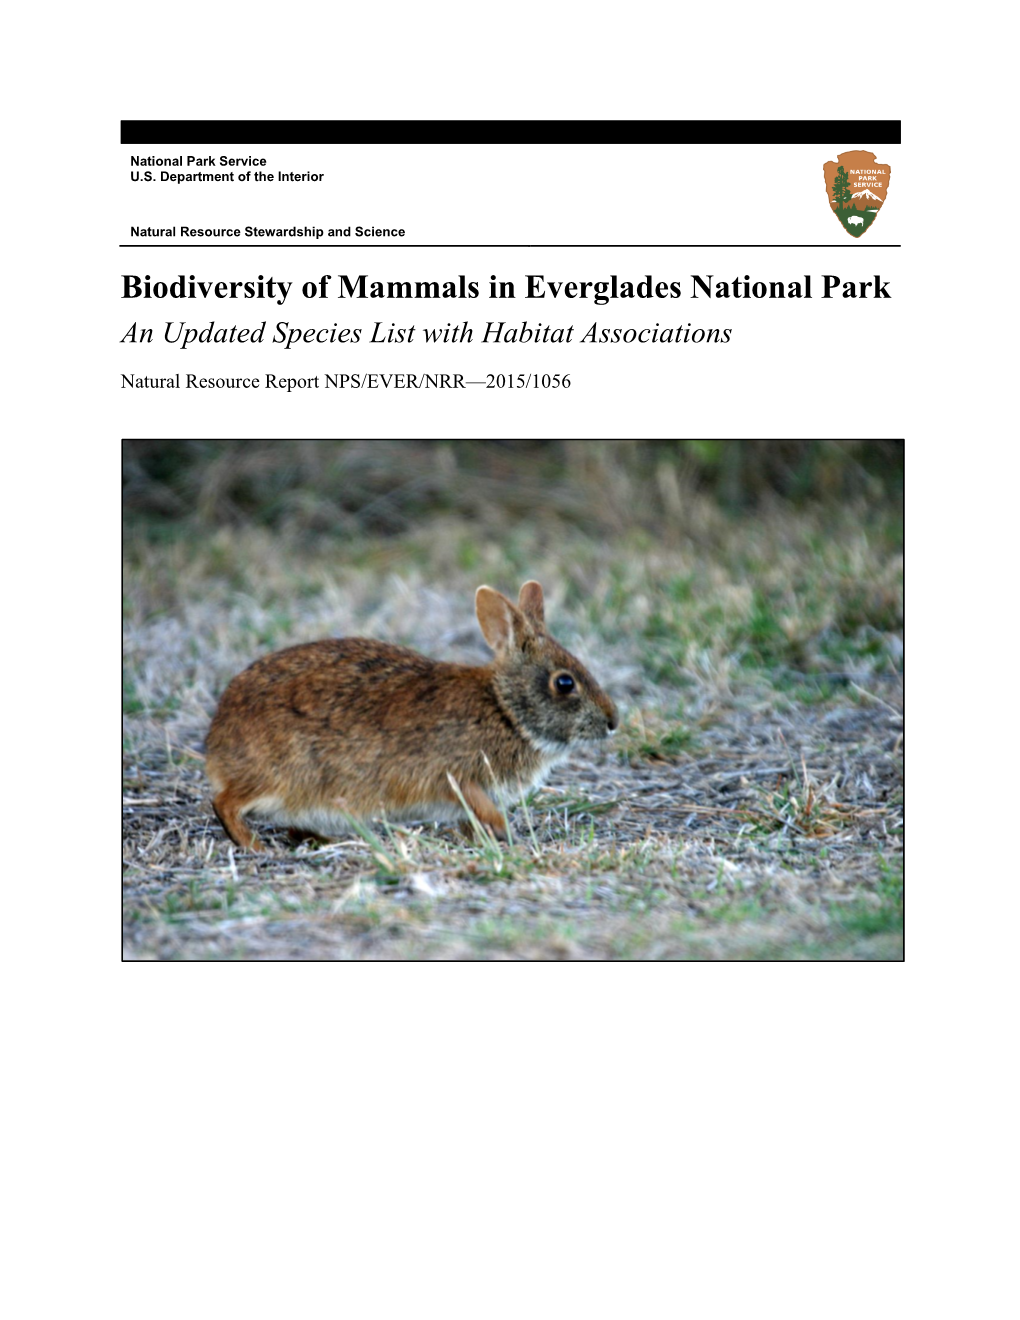 Biodiversity of Mammals in Everglades National Park an Updated Species List with Habitat Associations